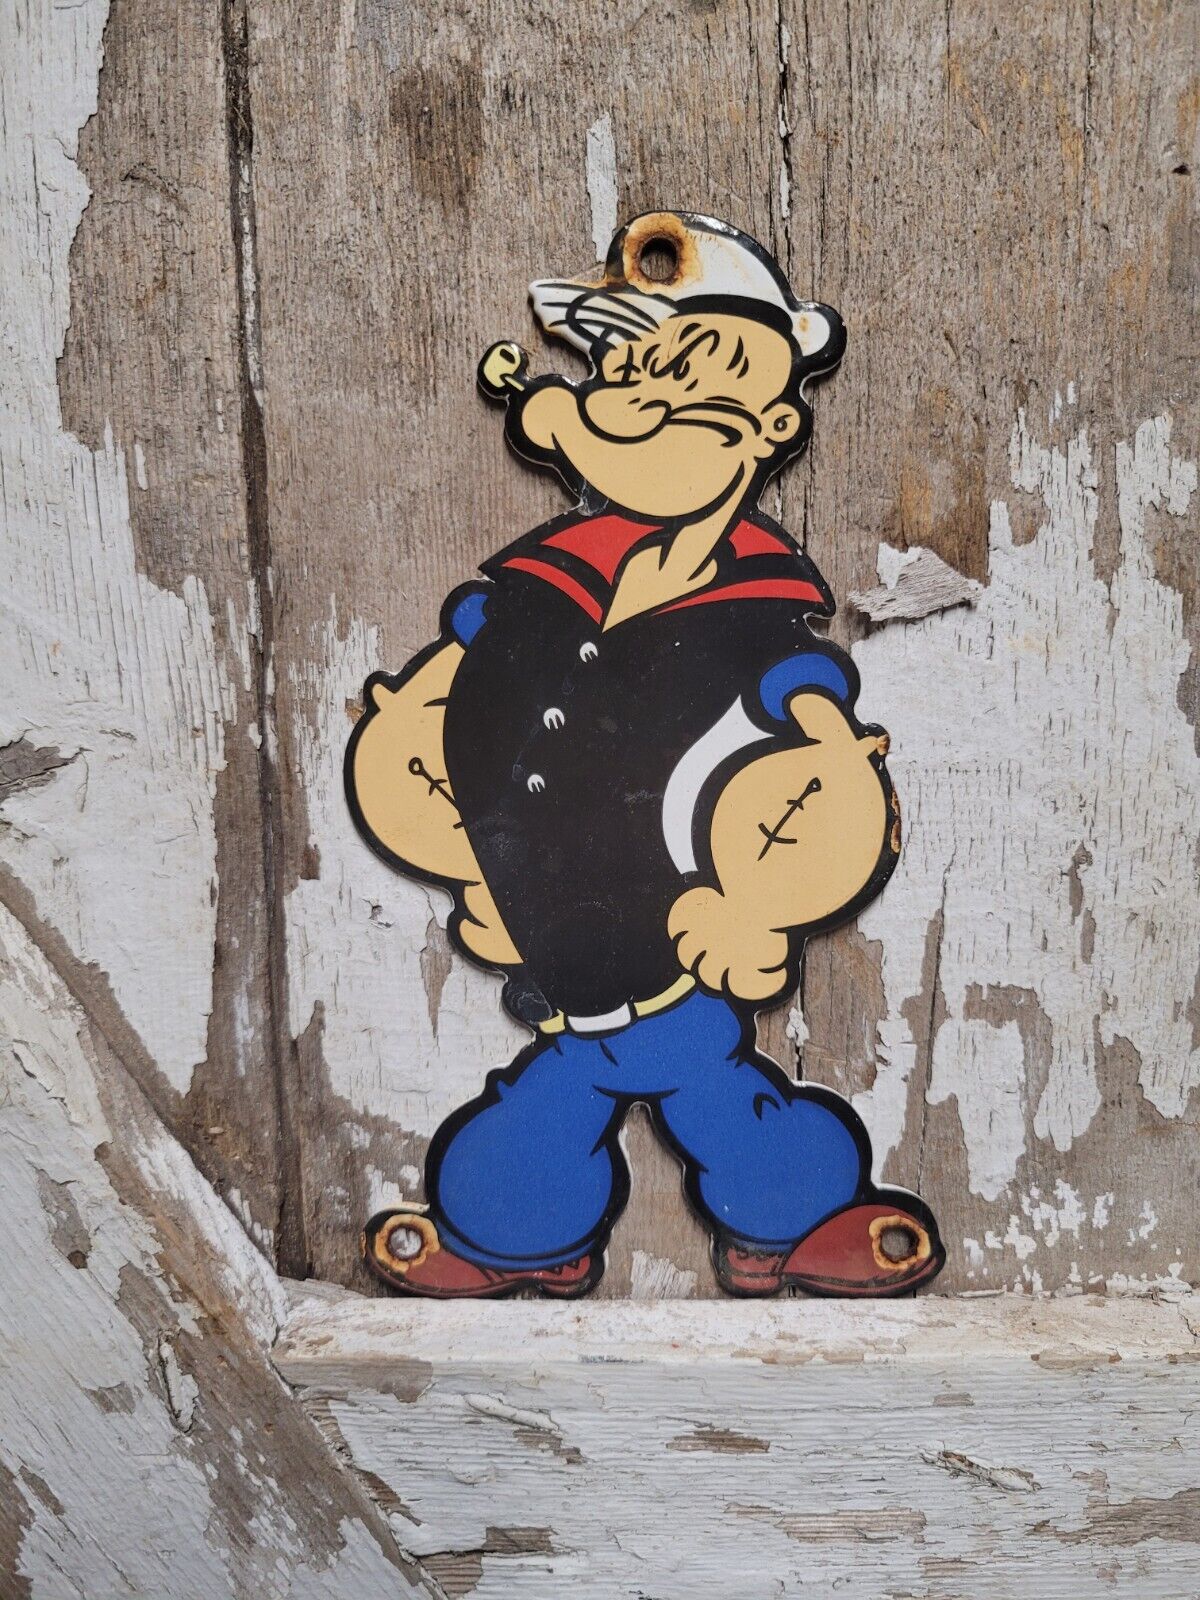 VINTAGE POPEYE THE SAILOR MAN PORCELAIN SIGN OLD CARTOON TELEVISION CHARACTER